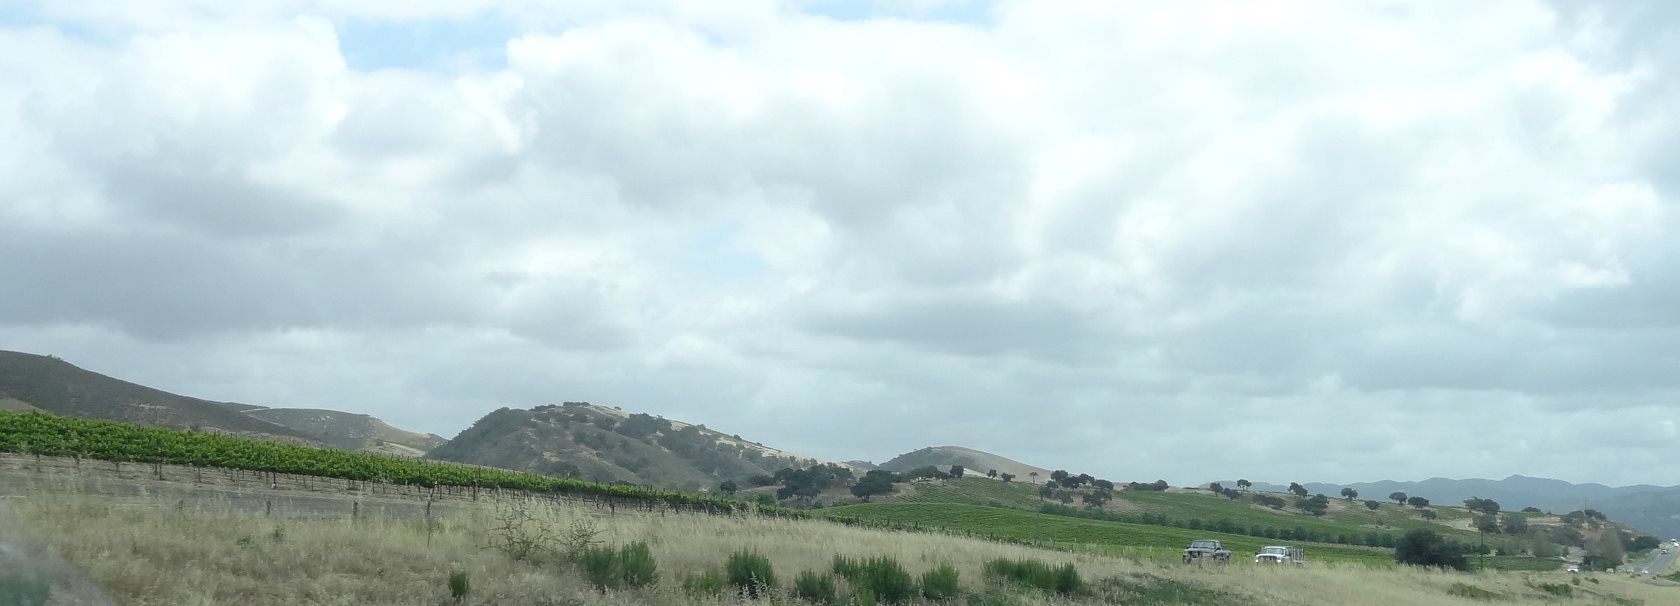 Follow Hiway 101 past Pismo, past the farms of Santa Maria. Now it changes. It's more dry. It's more Coastal Chaparrel. Now it is wine country where the intense sun makes the grapes produce sugar contents unmatchable further north.